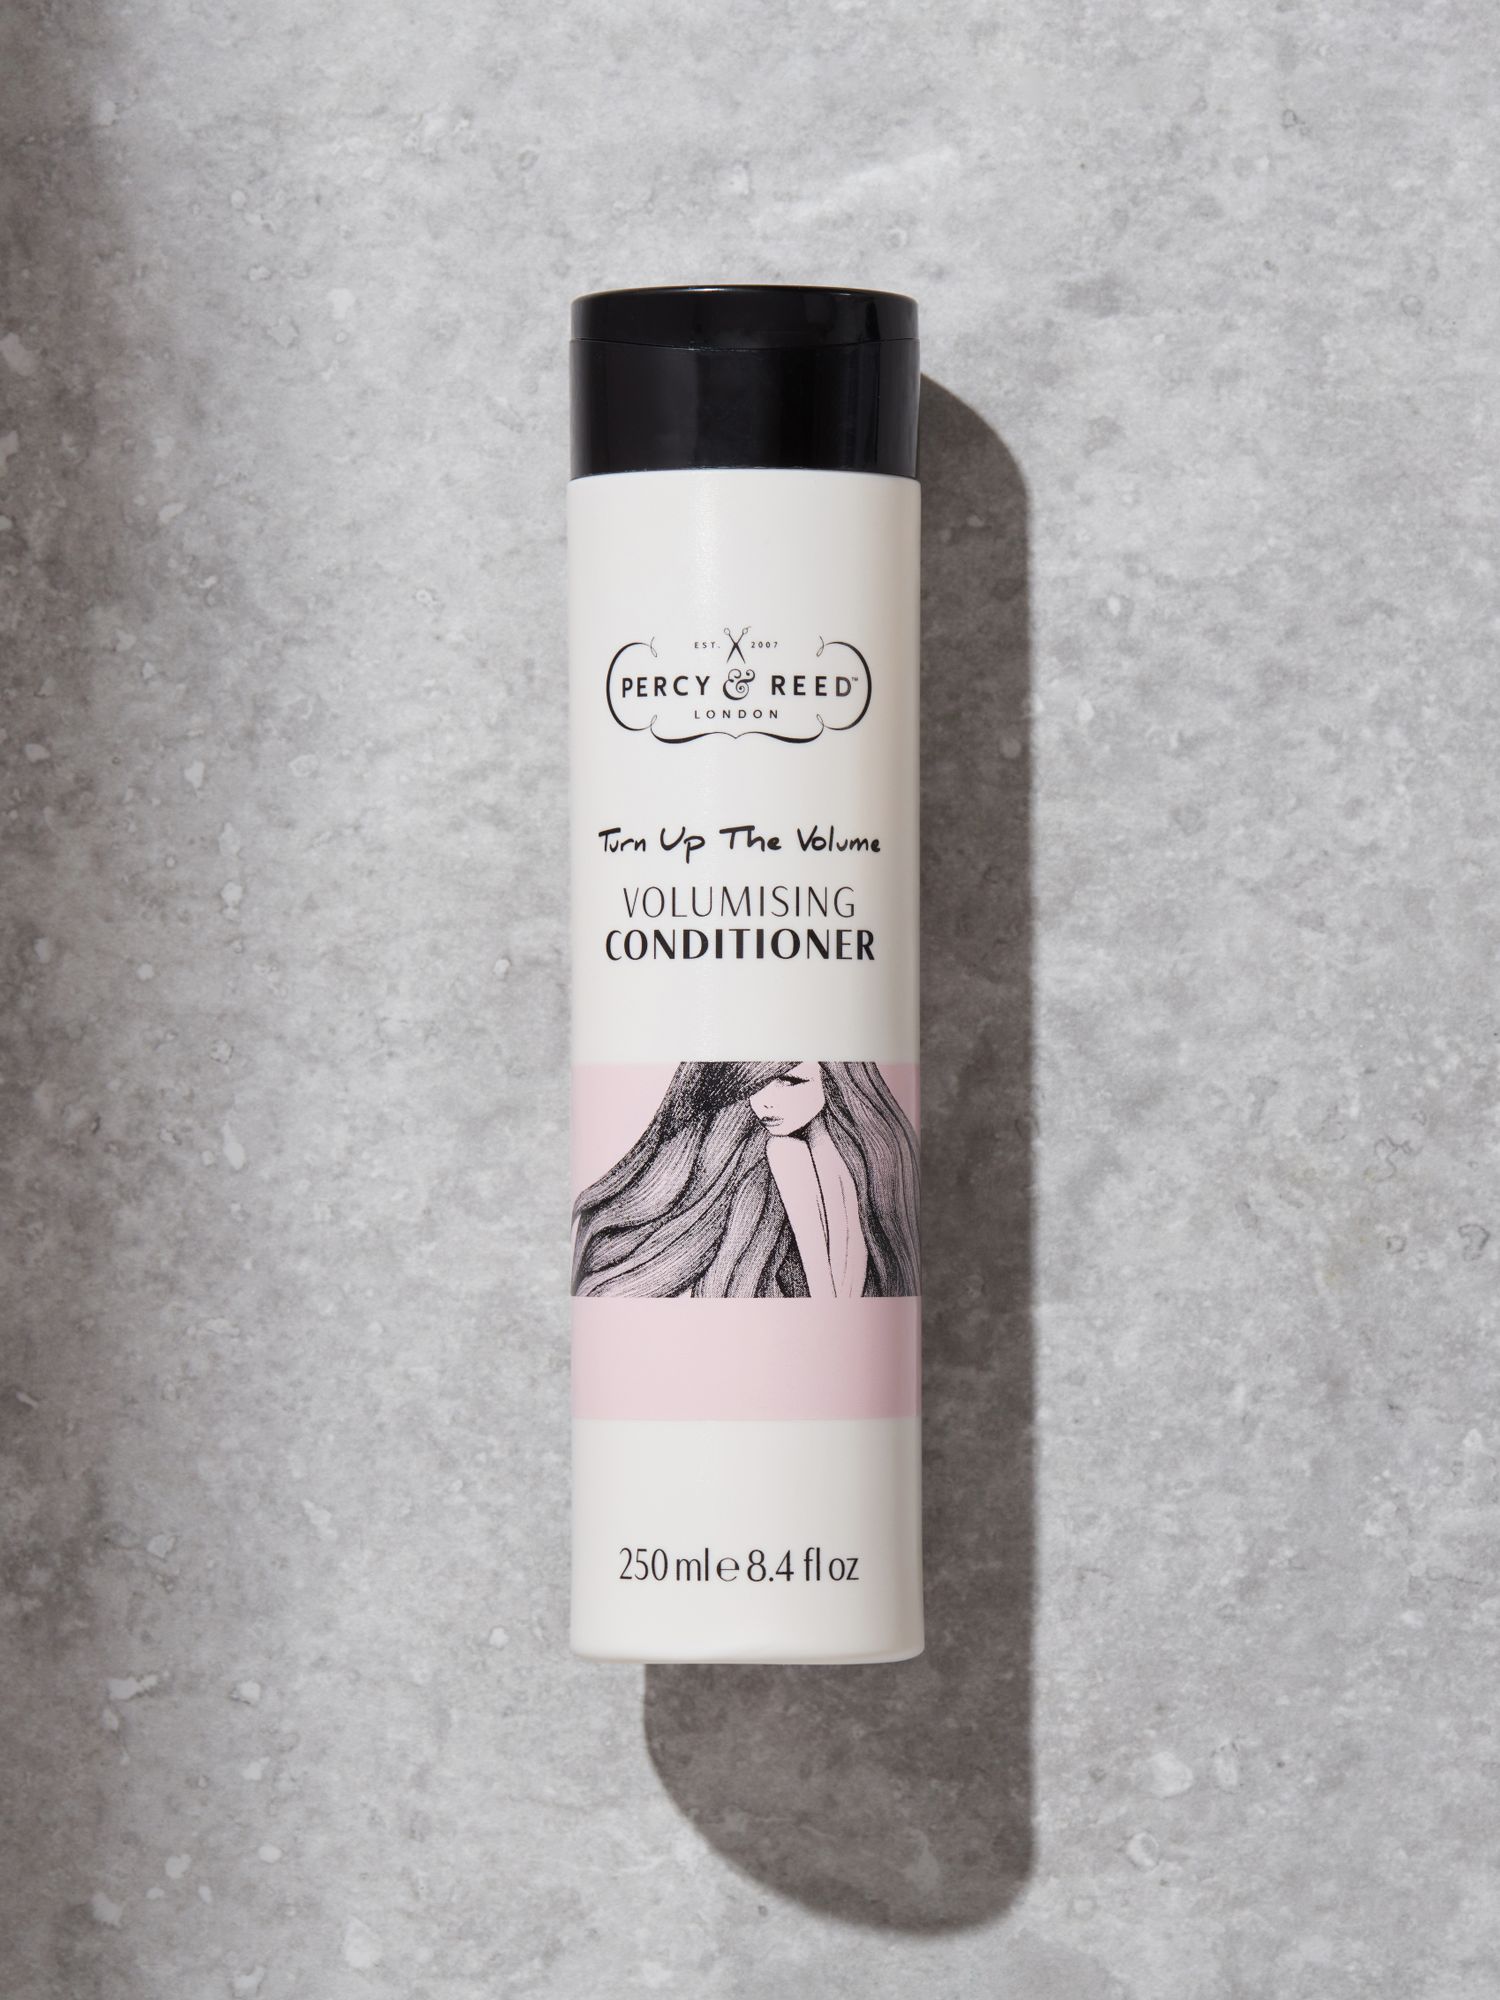 Percy & Reed Turn Up The Volume Volumising Conditioner, 250ml 2